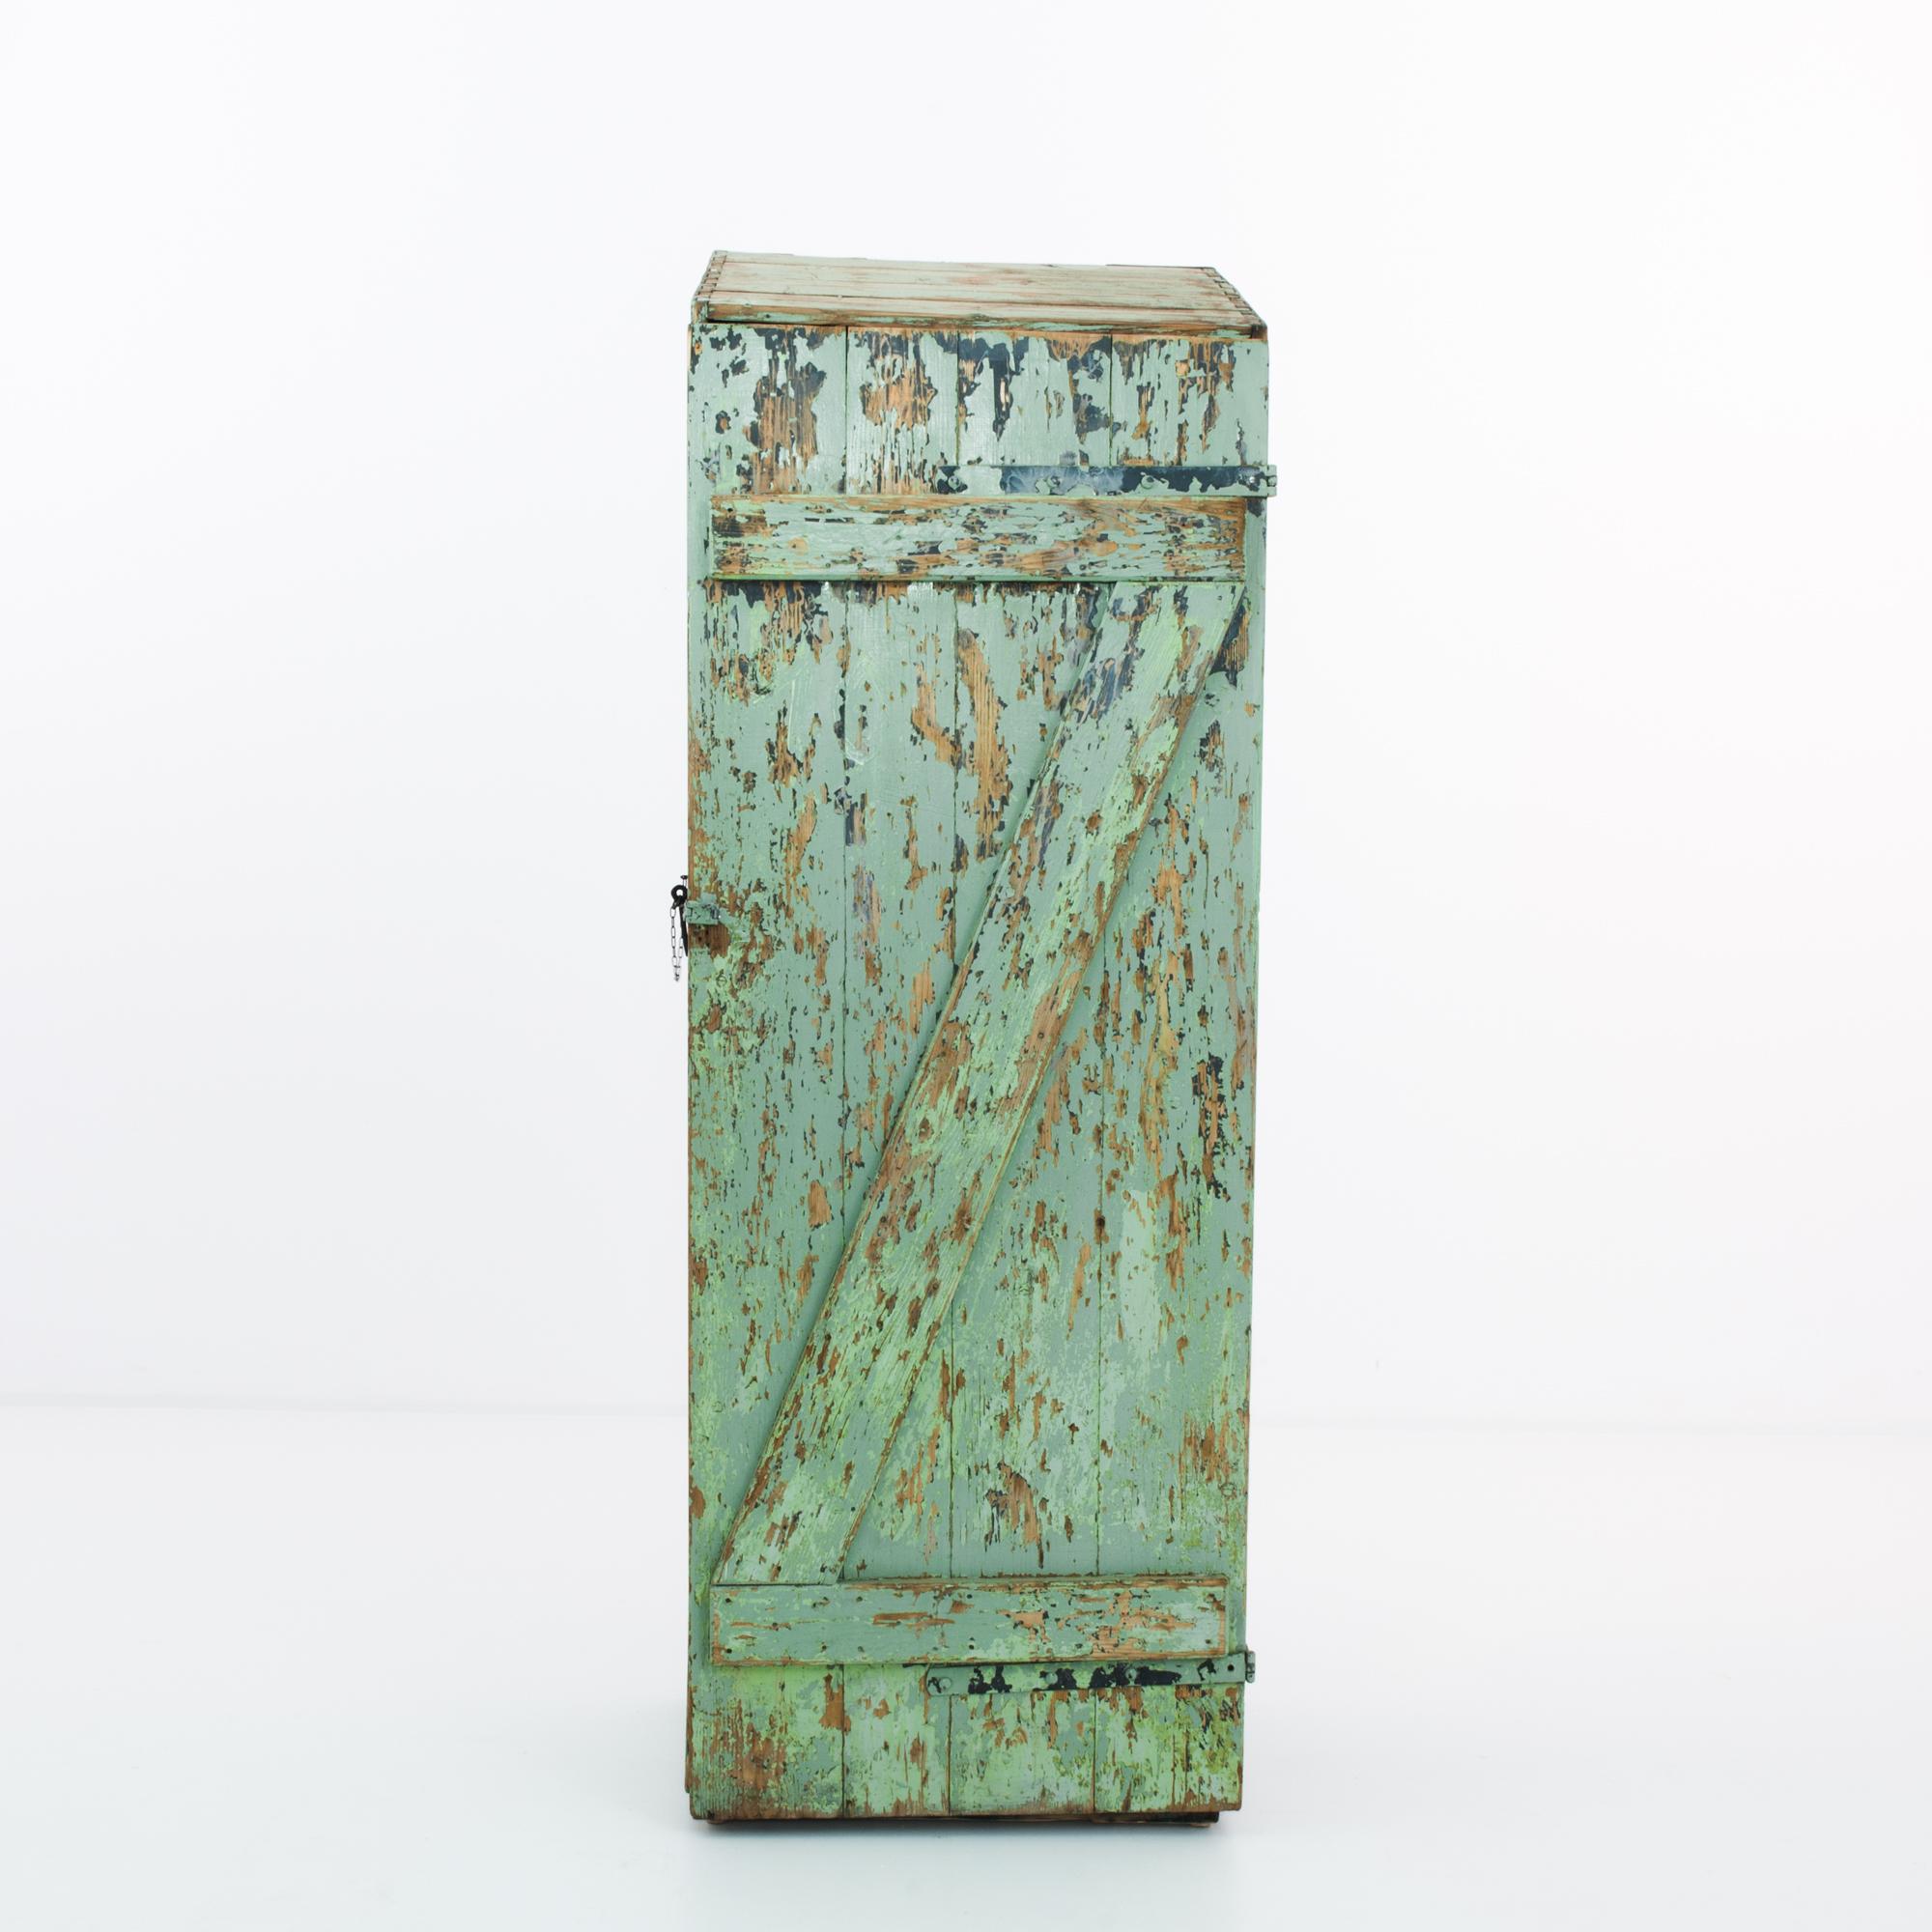 A single door wooden cabinet from Czechia circa 1950. This rustic storage locker clasps closed on sturdy steel hardware, prepared to be locked firmly shut. An elemental patina suggests outdoor use, flaking to reveal the golden hue of old growth